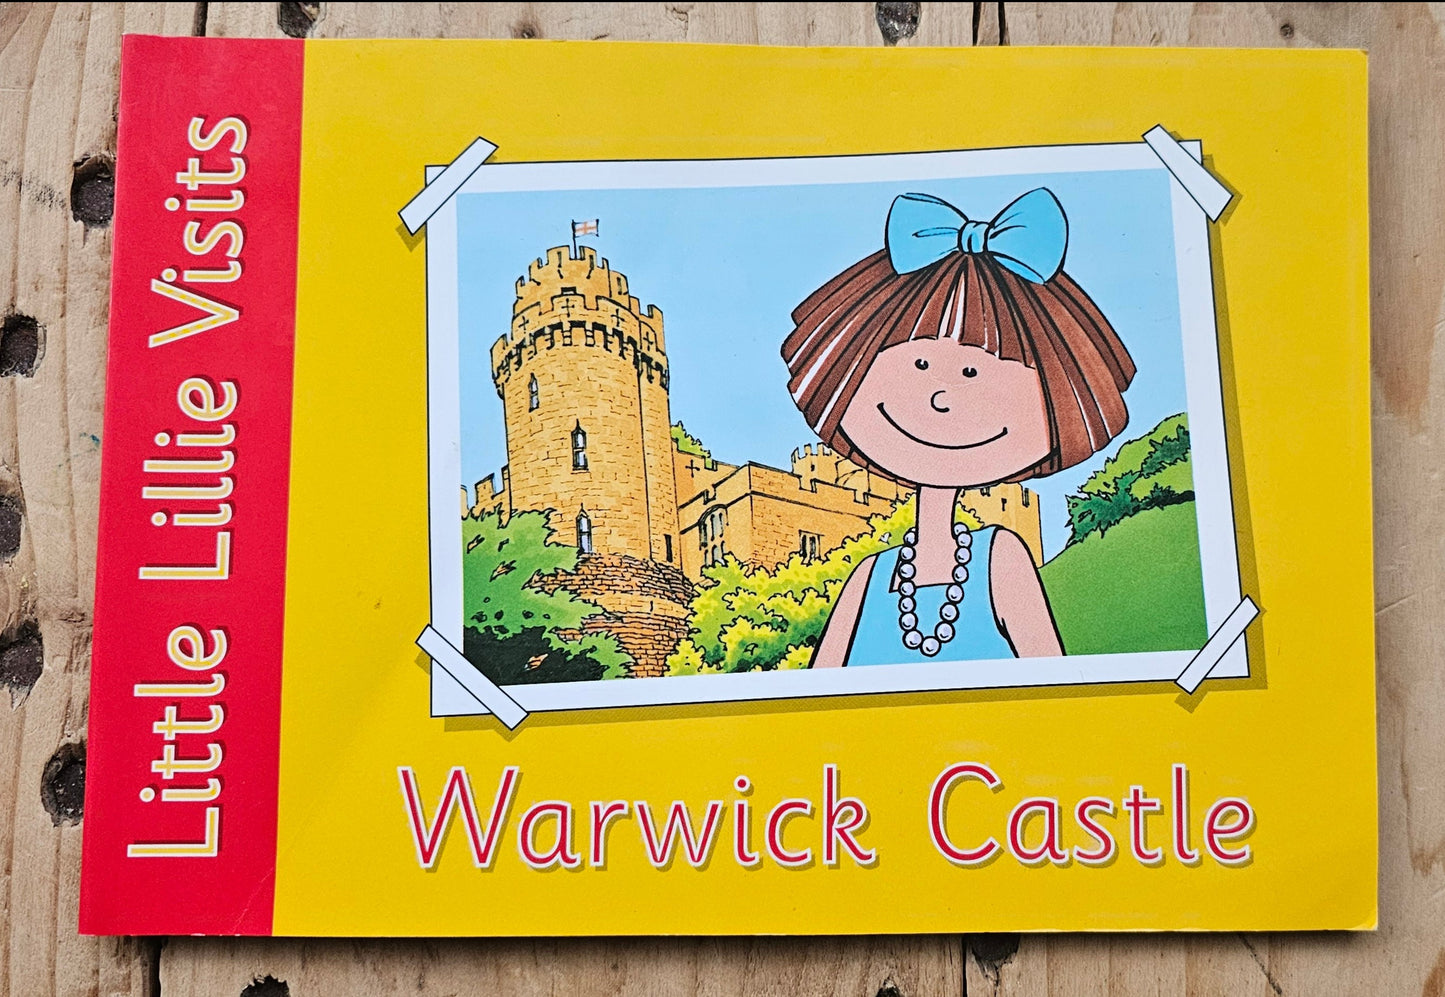 British history for young children - Warwick Castle